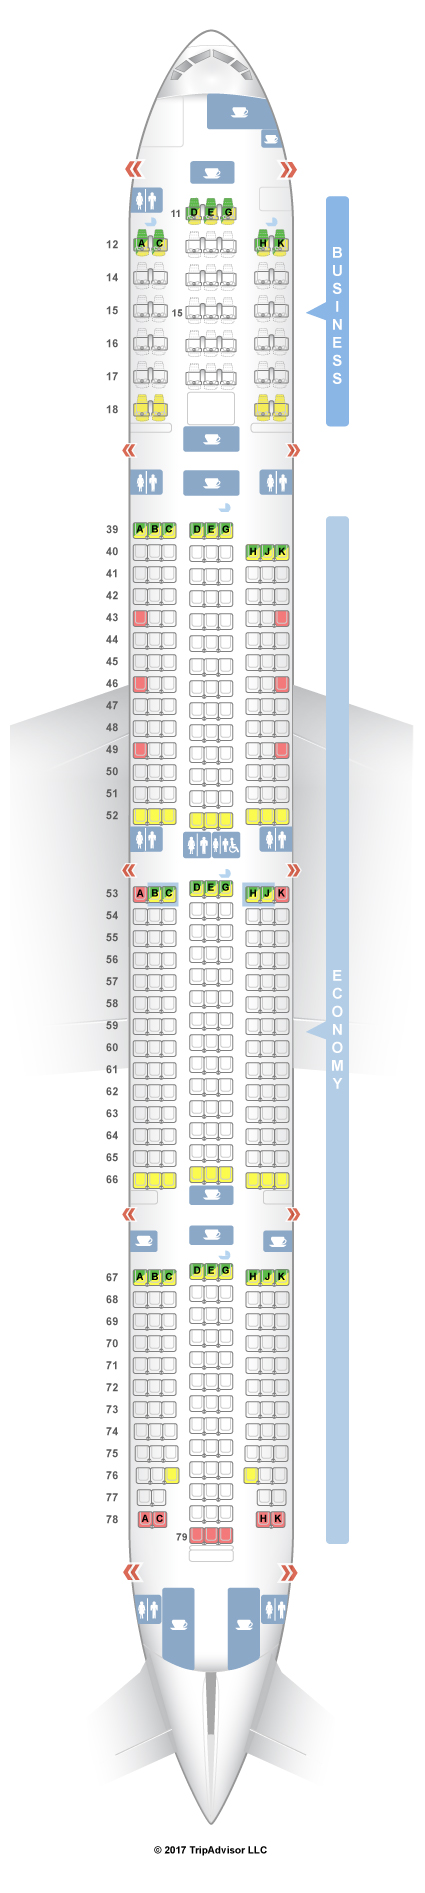 Boeing 777 300er Cathay Pacific Seating Chart